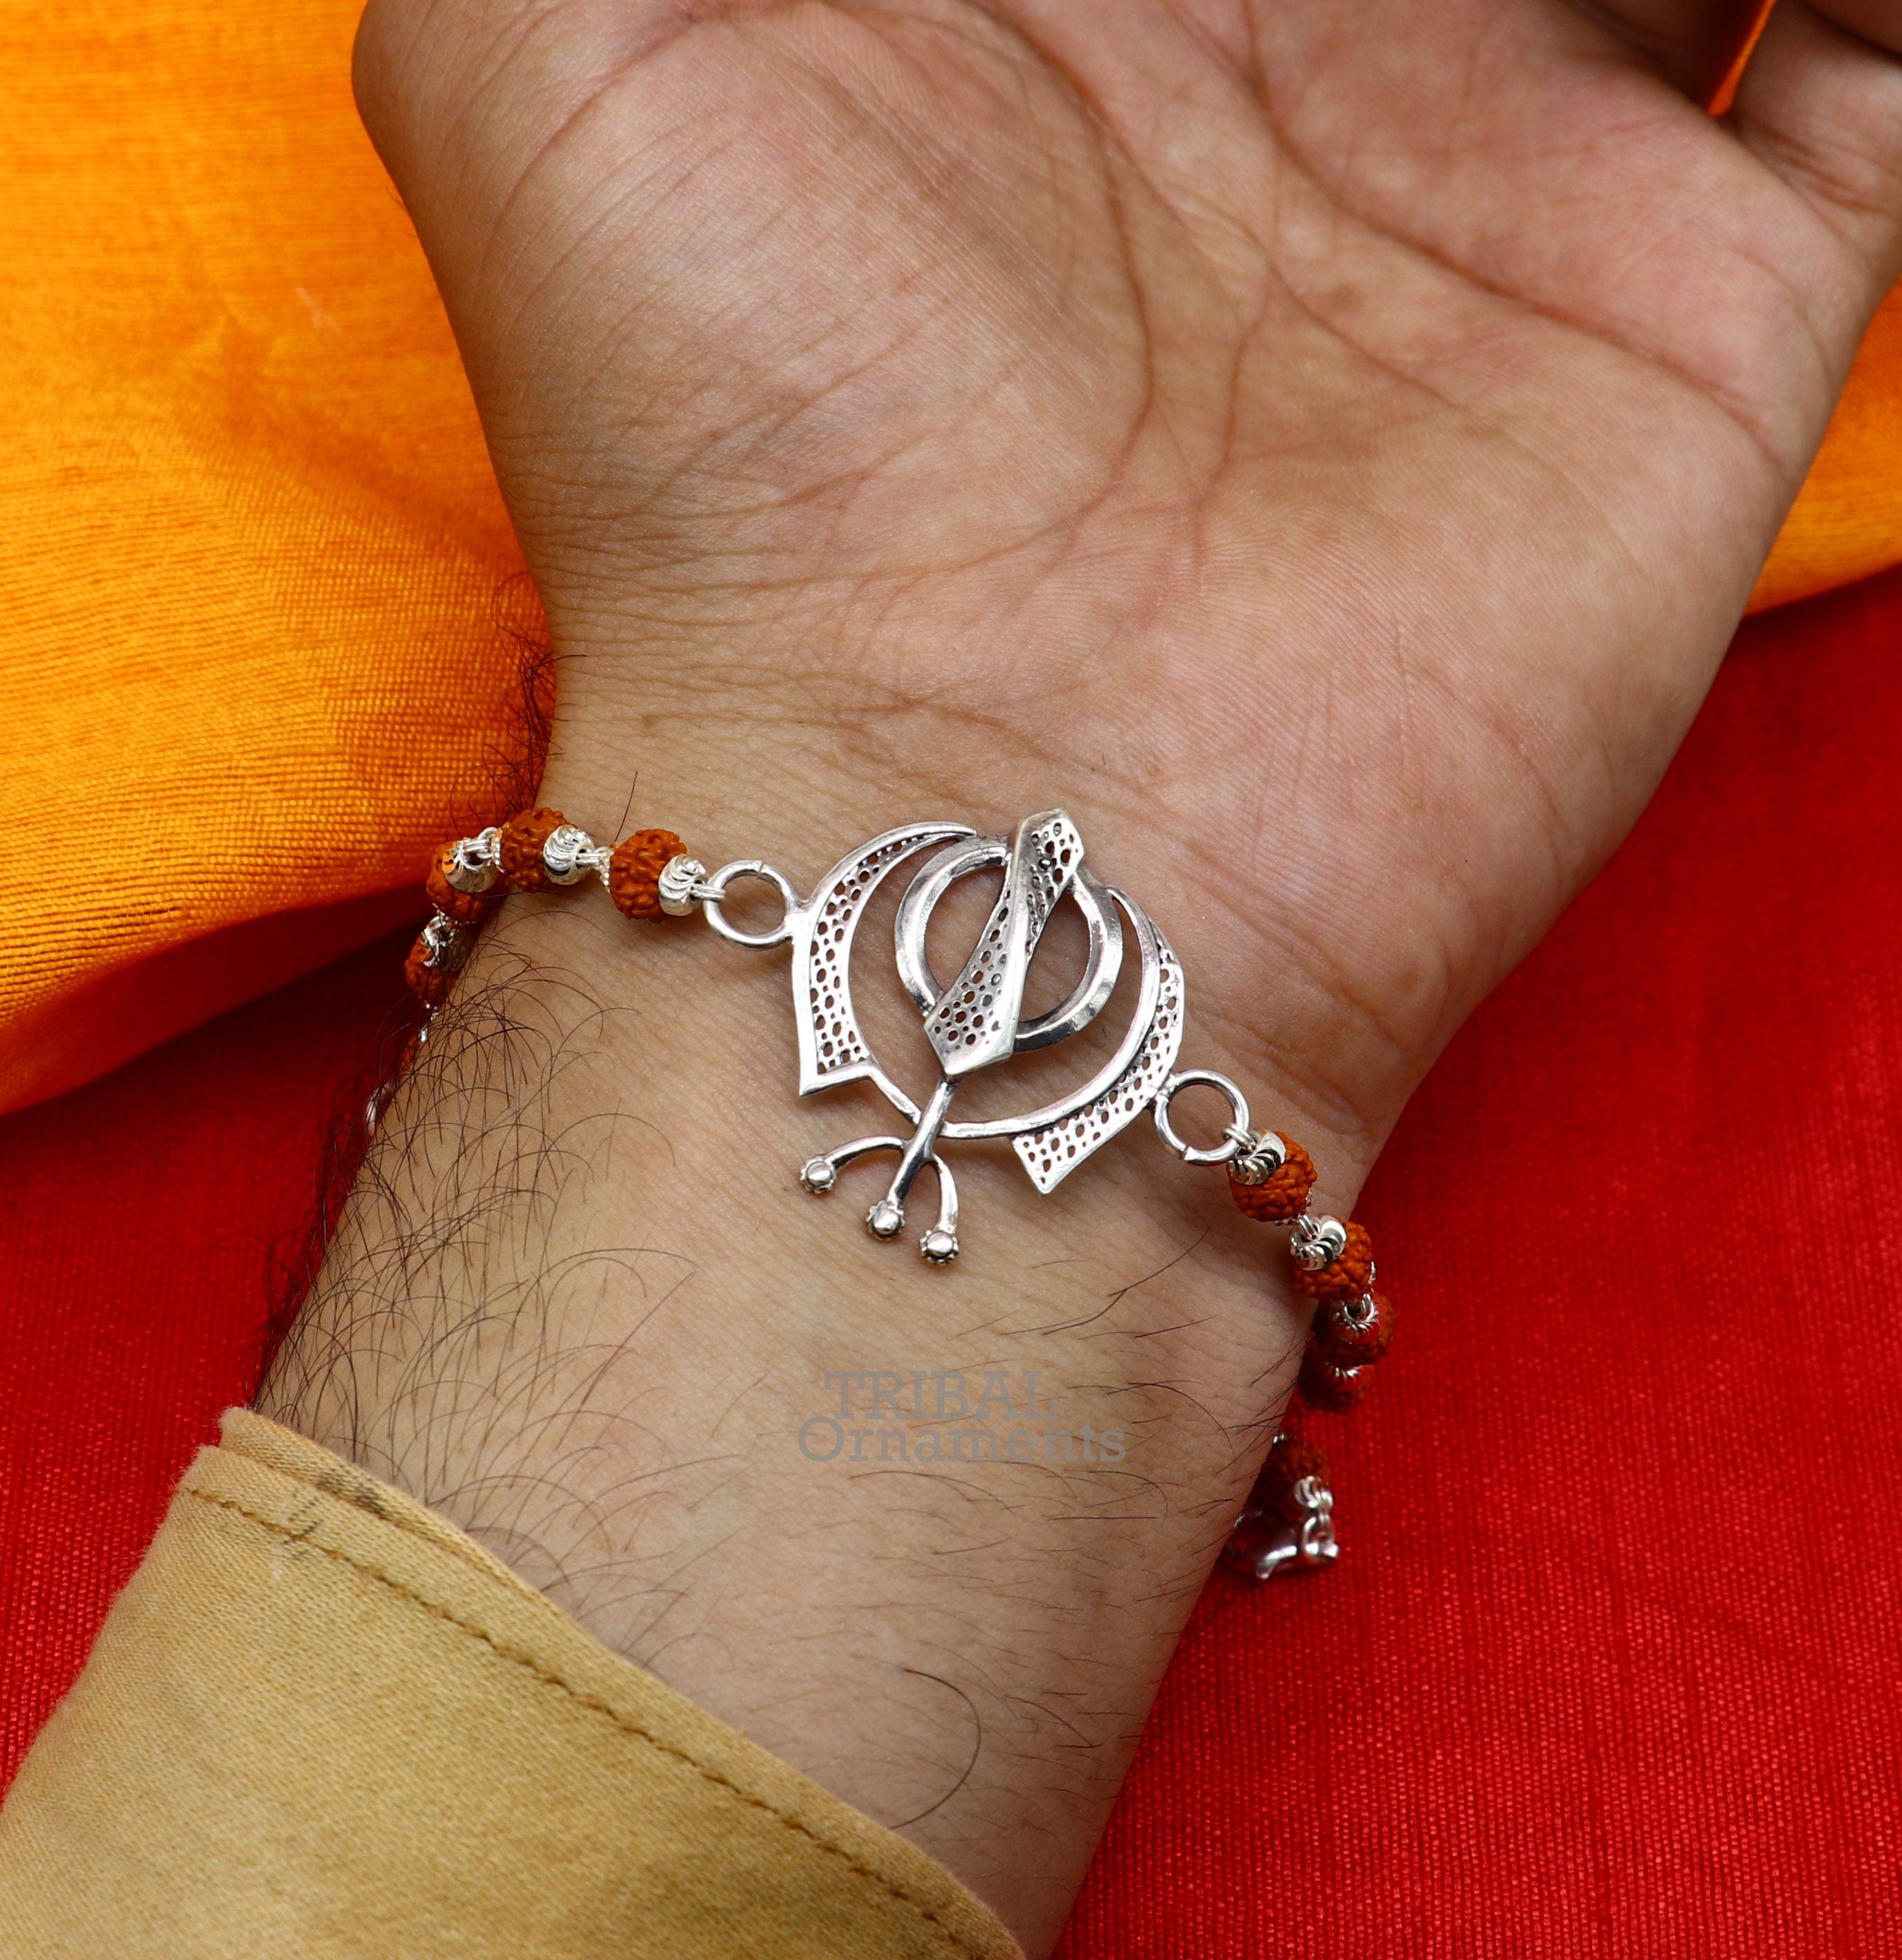 Dwarkadhish Silver Rakhi Tie Bracelet With Silver Charms For Brothers